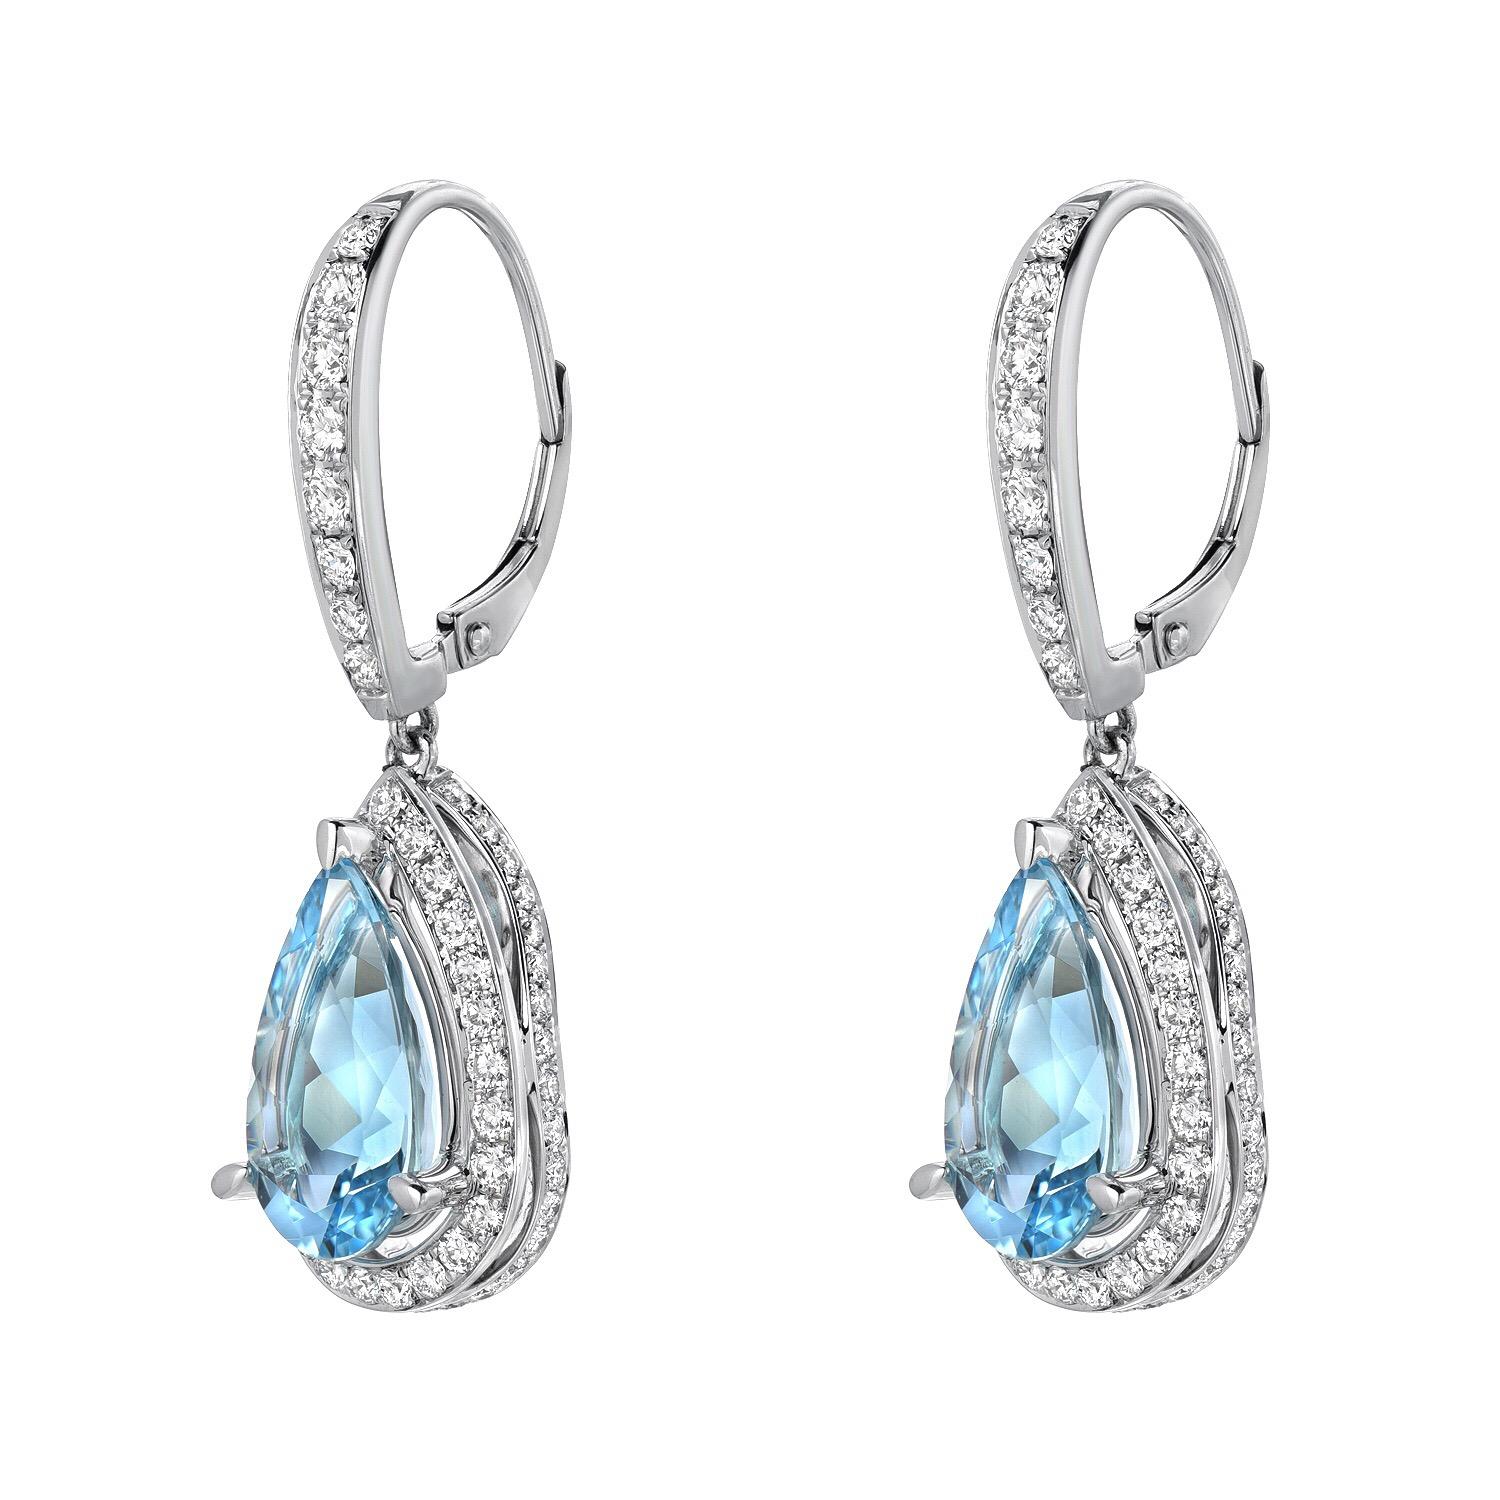 Marvelous pair of 5.23 carats total Aquamarine pear shapes, set in diamond earrings weighing a total of 1.40 carats. These drop, lever back earrings for women, are crafted in 18K white gold,
Total length is approximately 1.25 inches.
Returns are